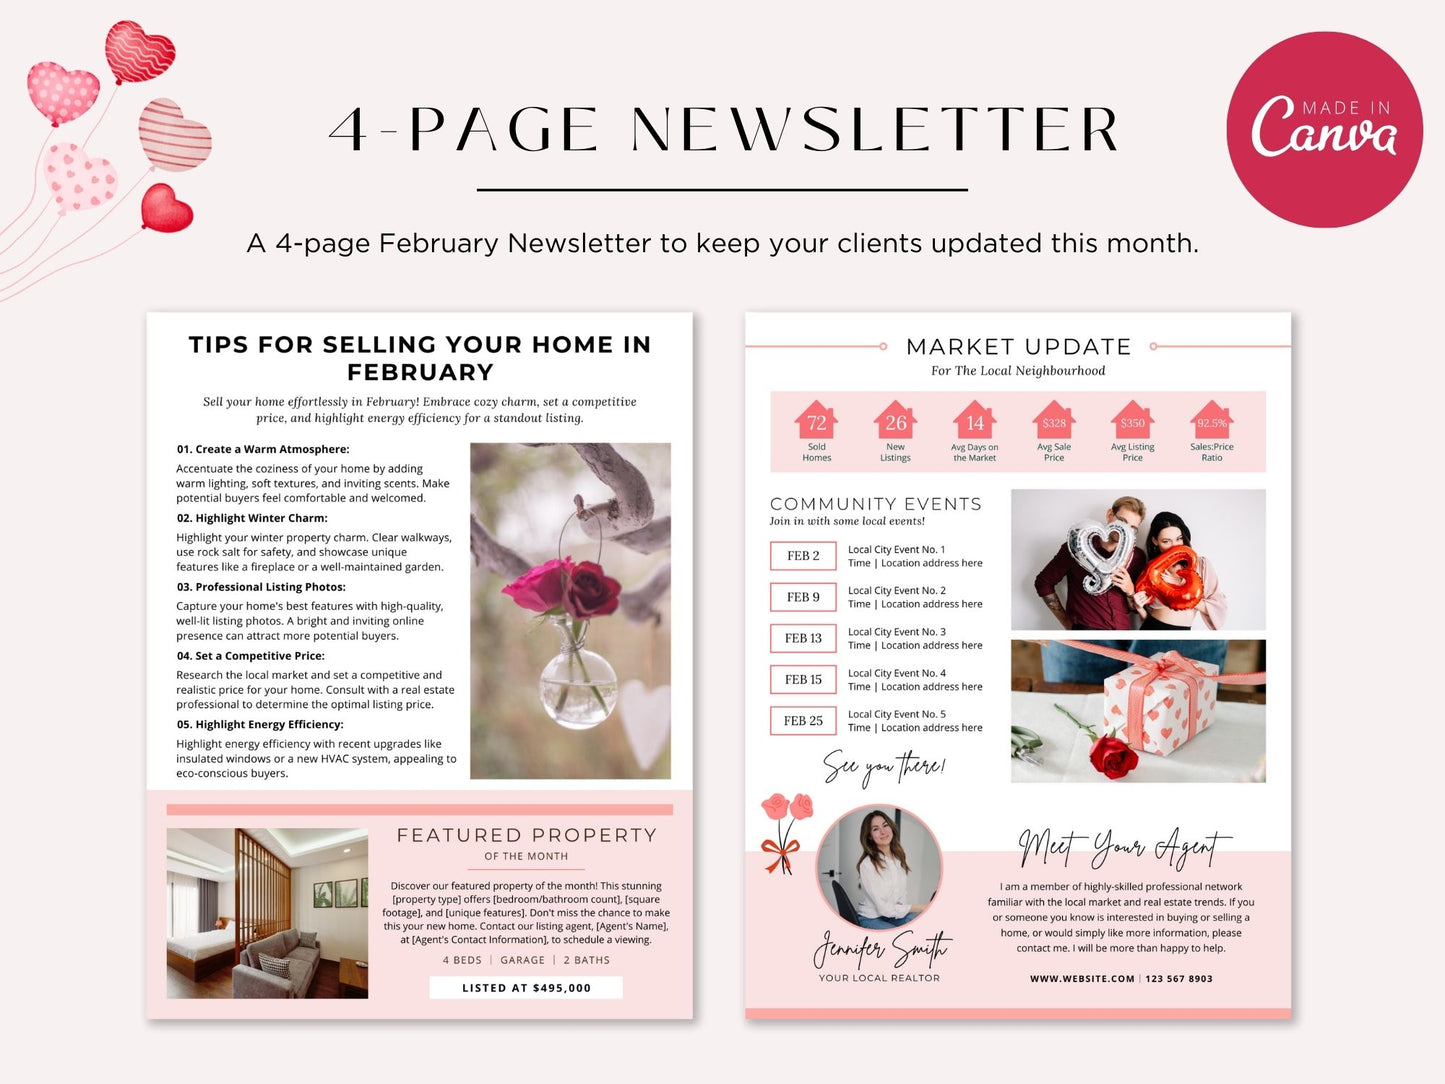 Minimal February Newsletter 2024 - Professionally designed real estate newsletter template with a clean and modern aesthetic.